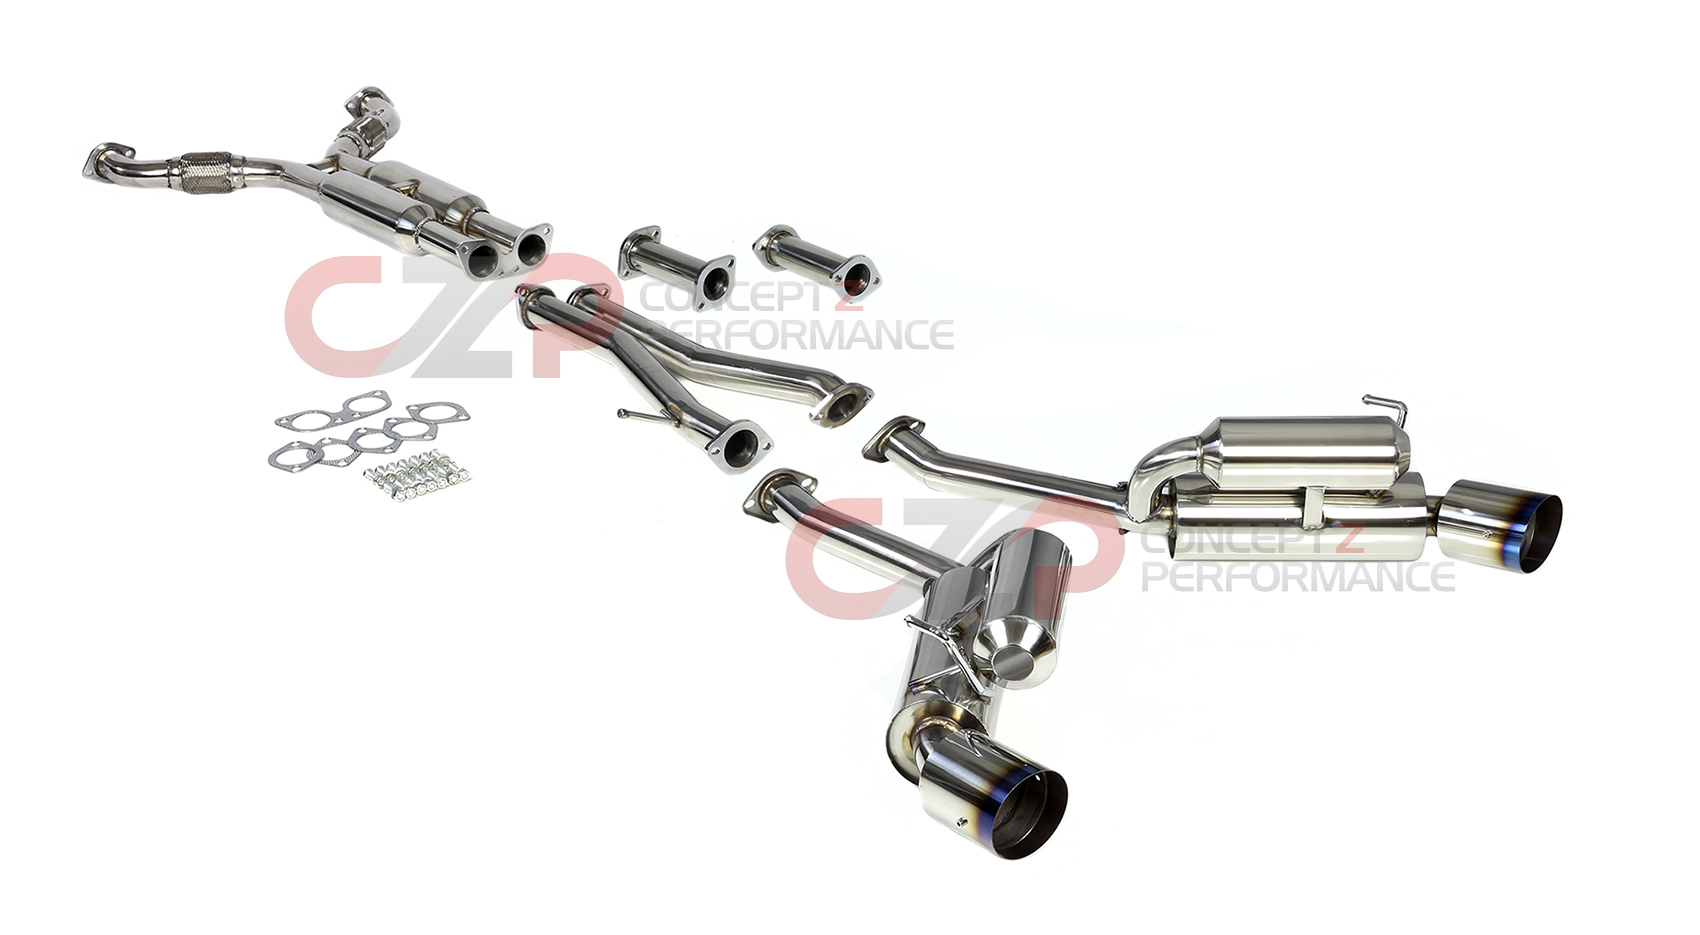 DNA Motoring True Dual Catback Exhaust System w/ Burnt Tips - Nissan 350Z / Infiniti G35 Coupe